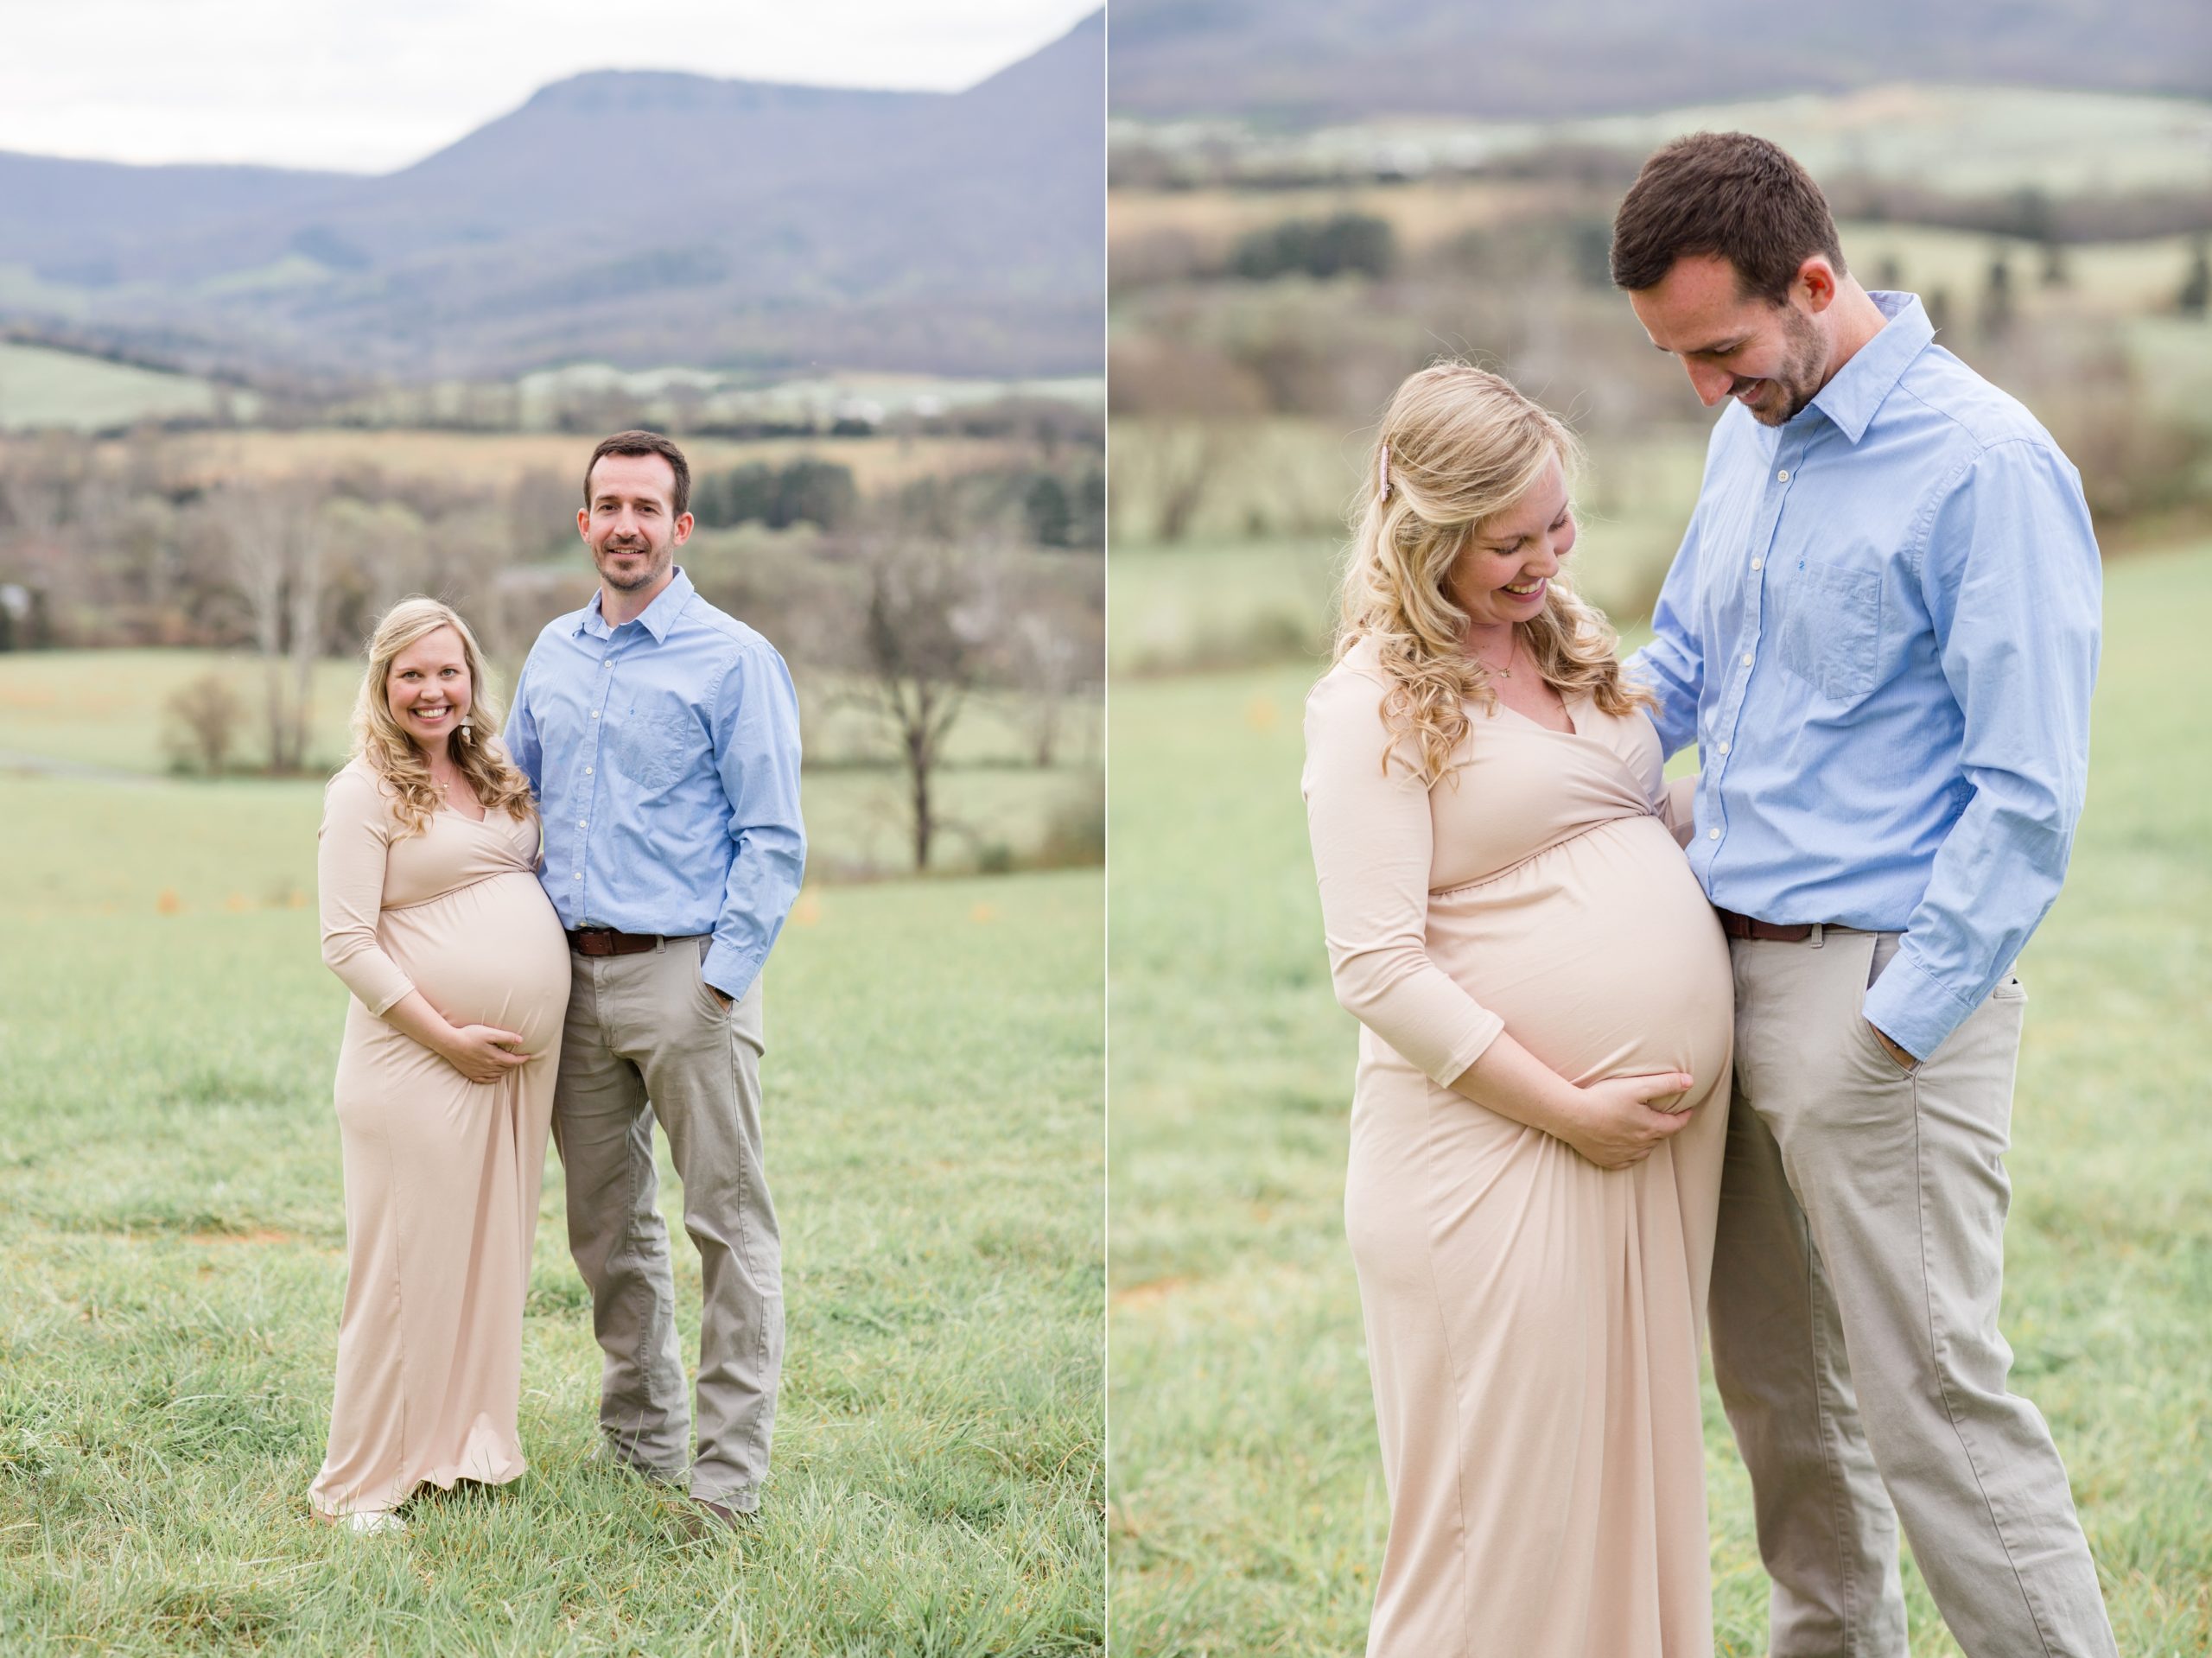 Mom and dad expecting new baby pose together during mountainside maternity session with family photographer and educator Rebecca Rice of Rebecca Rice Photography. This sweet maternity session was featured on the blog and on my monthly membership, Behind the Lens. Click to read more about this sweet session live on the blog now! 